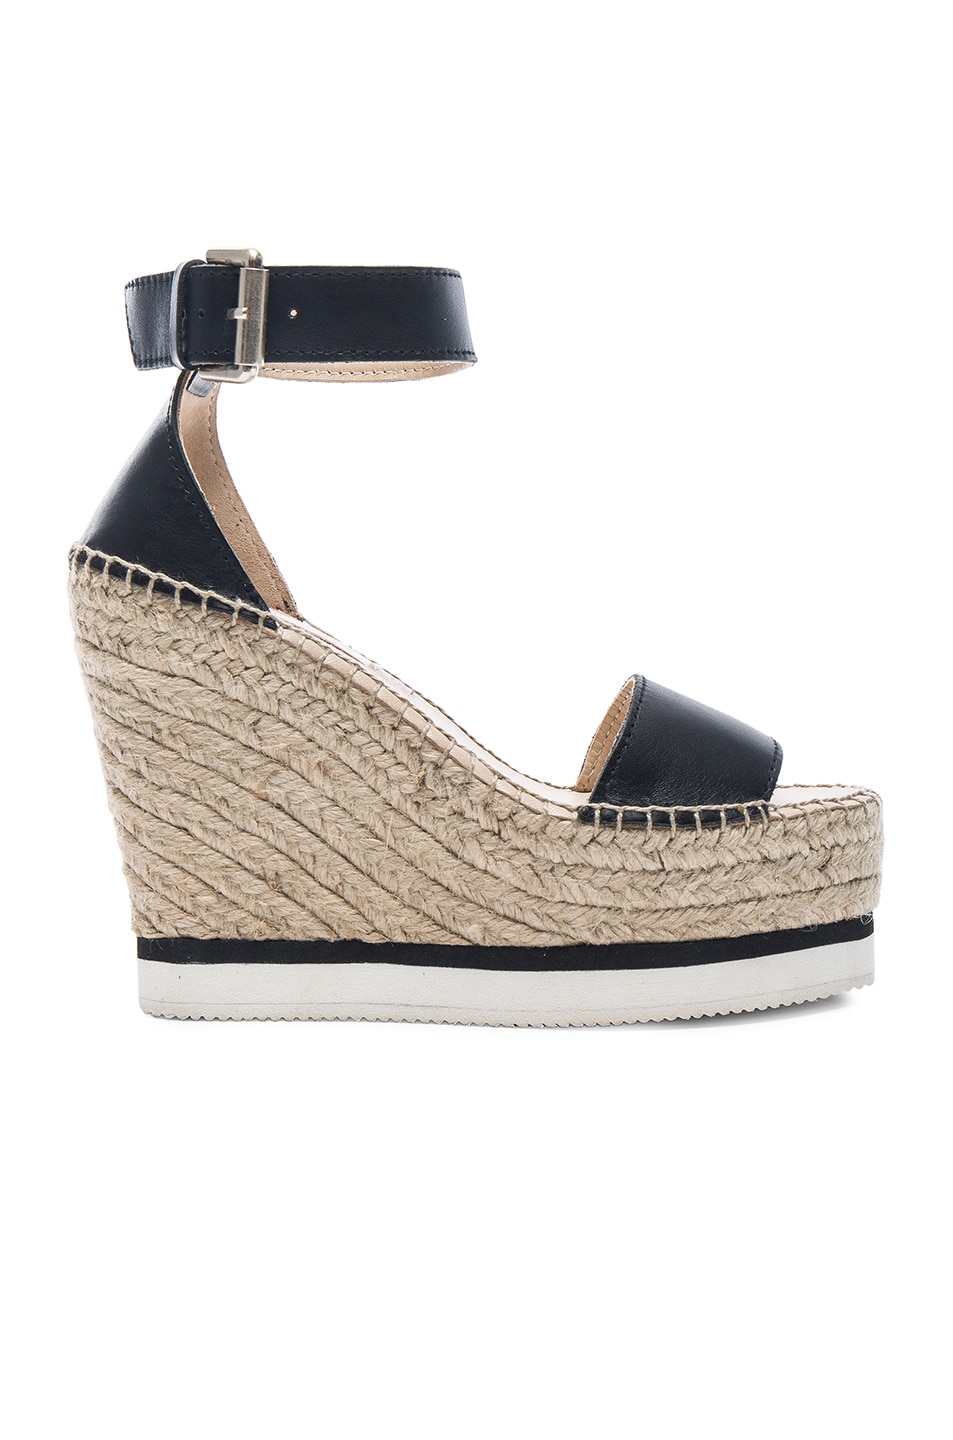 Image 1 of See By Chloe Leather Glyn Espadrille Wedges in Black